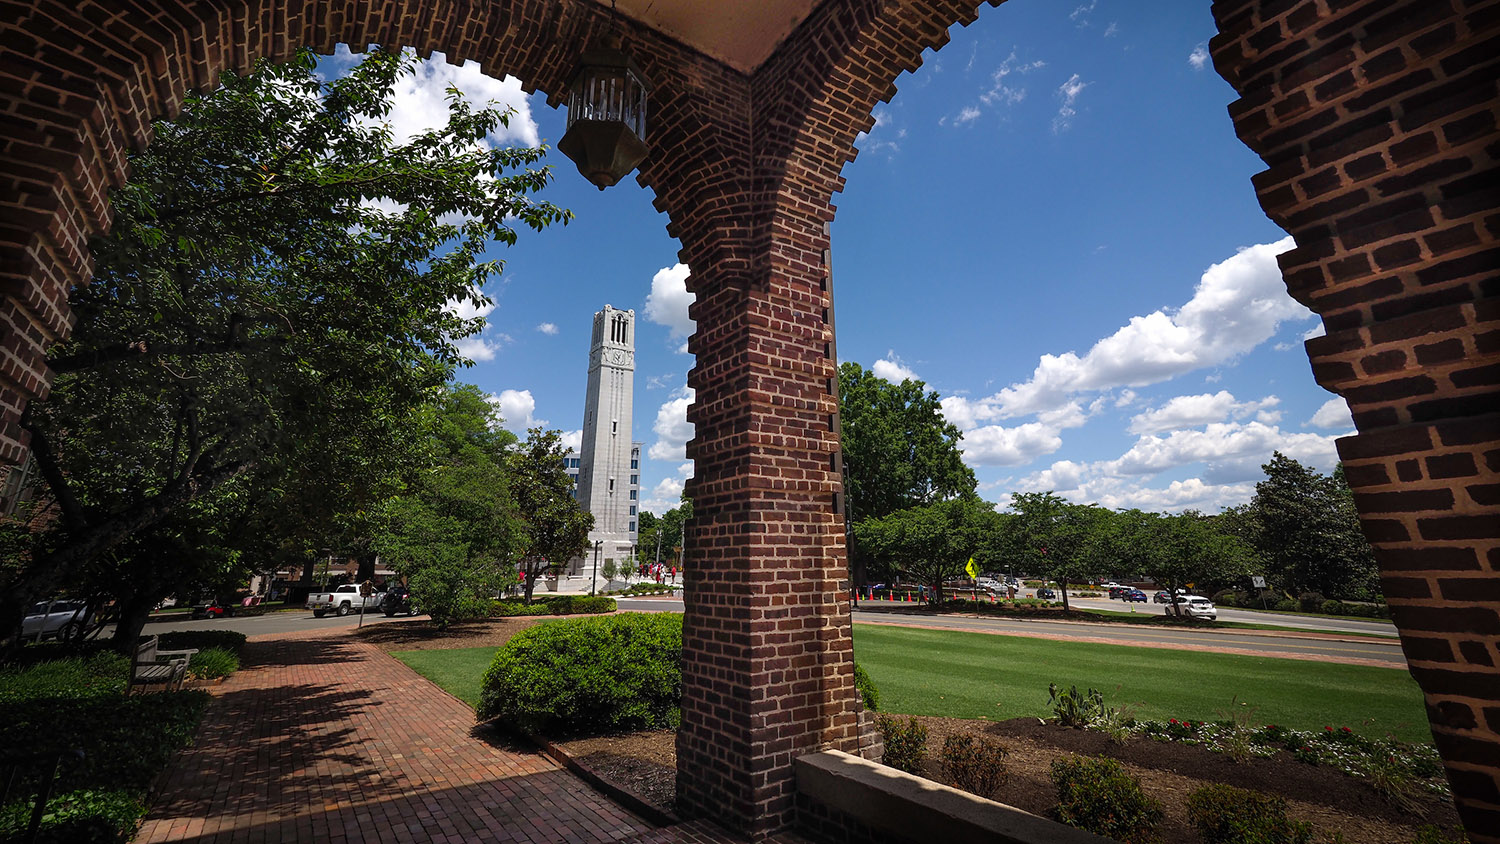 An image of the NC State belltower